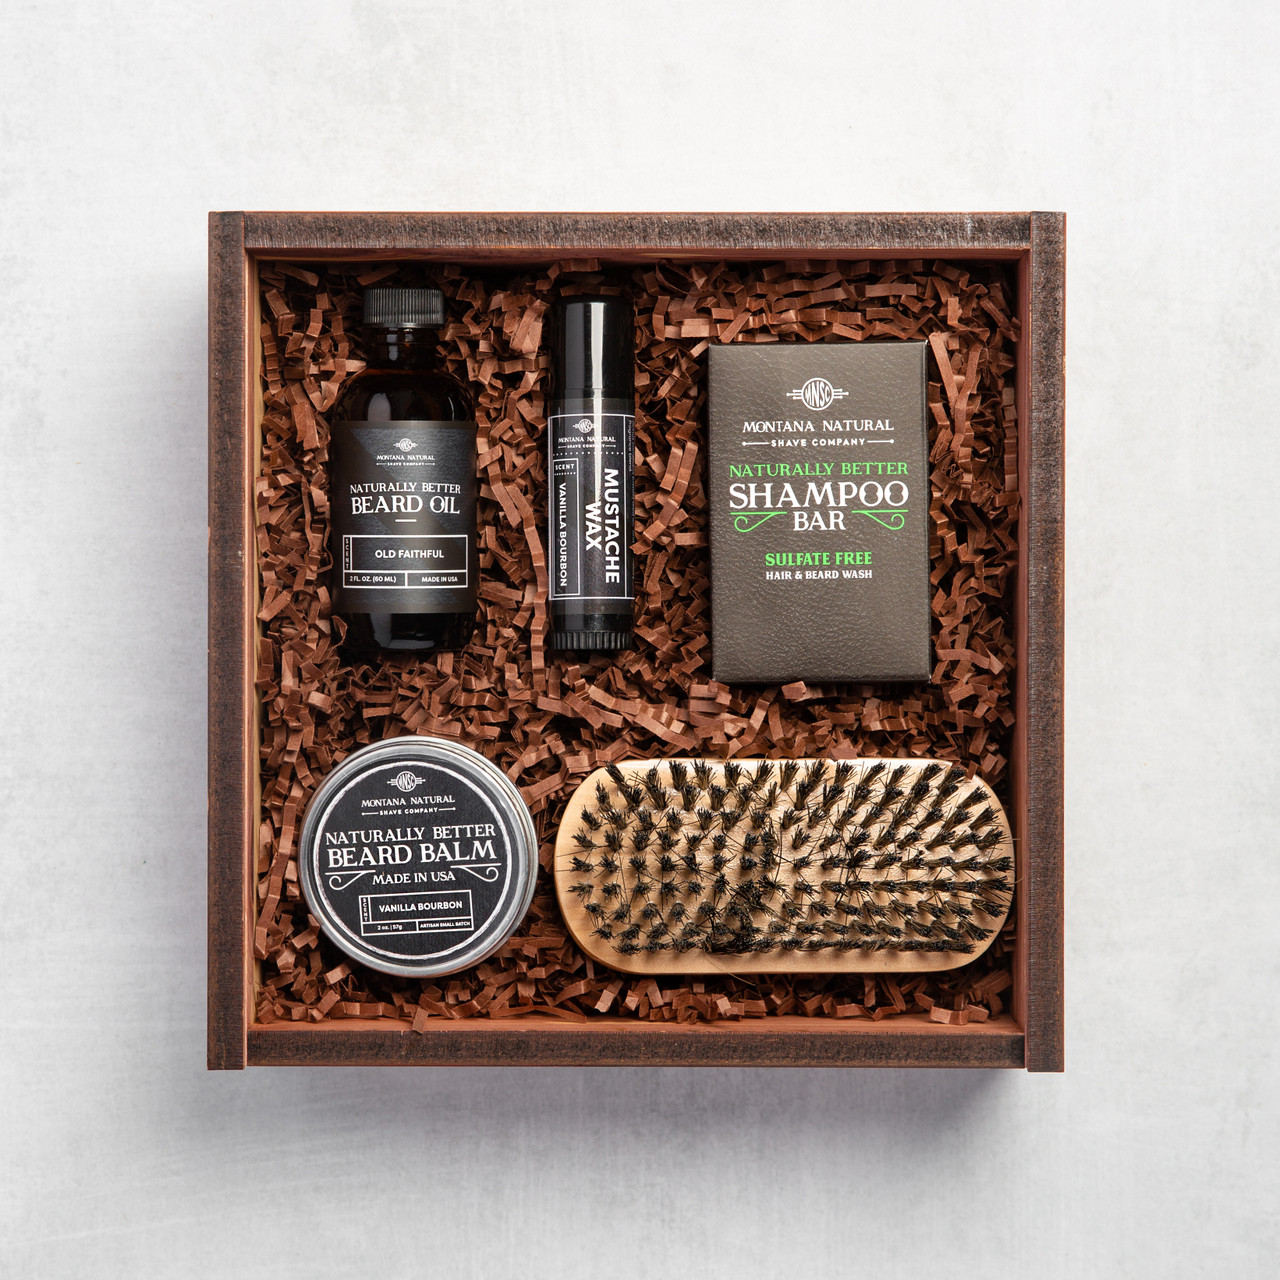 Petroleum-free, 100% Natural, Made in USA - Our Beard Gift Set is the perfect give for the unshaven.